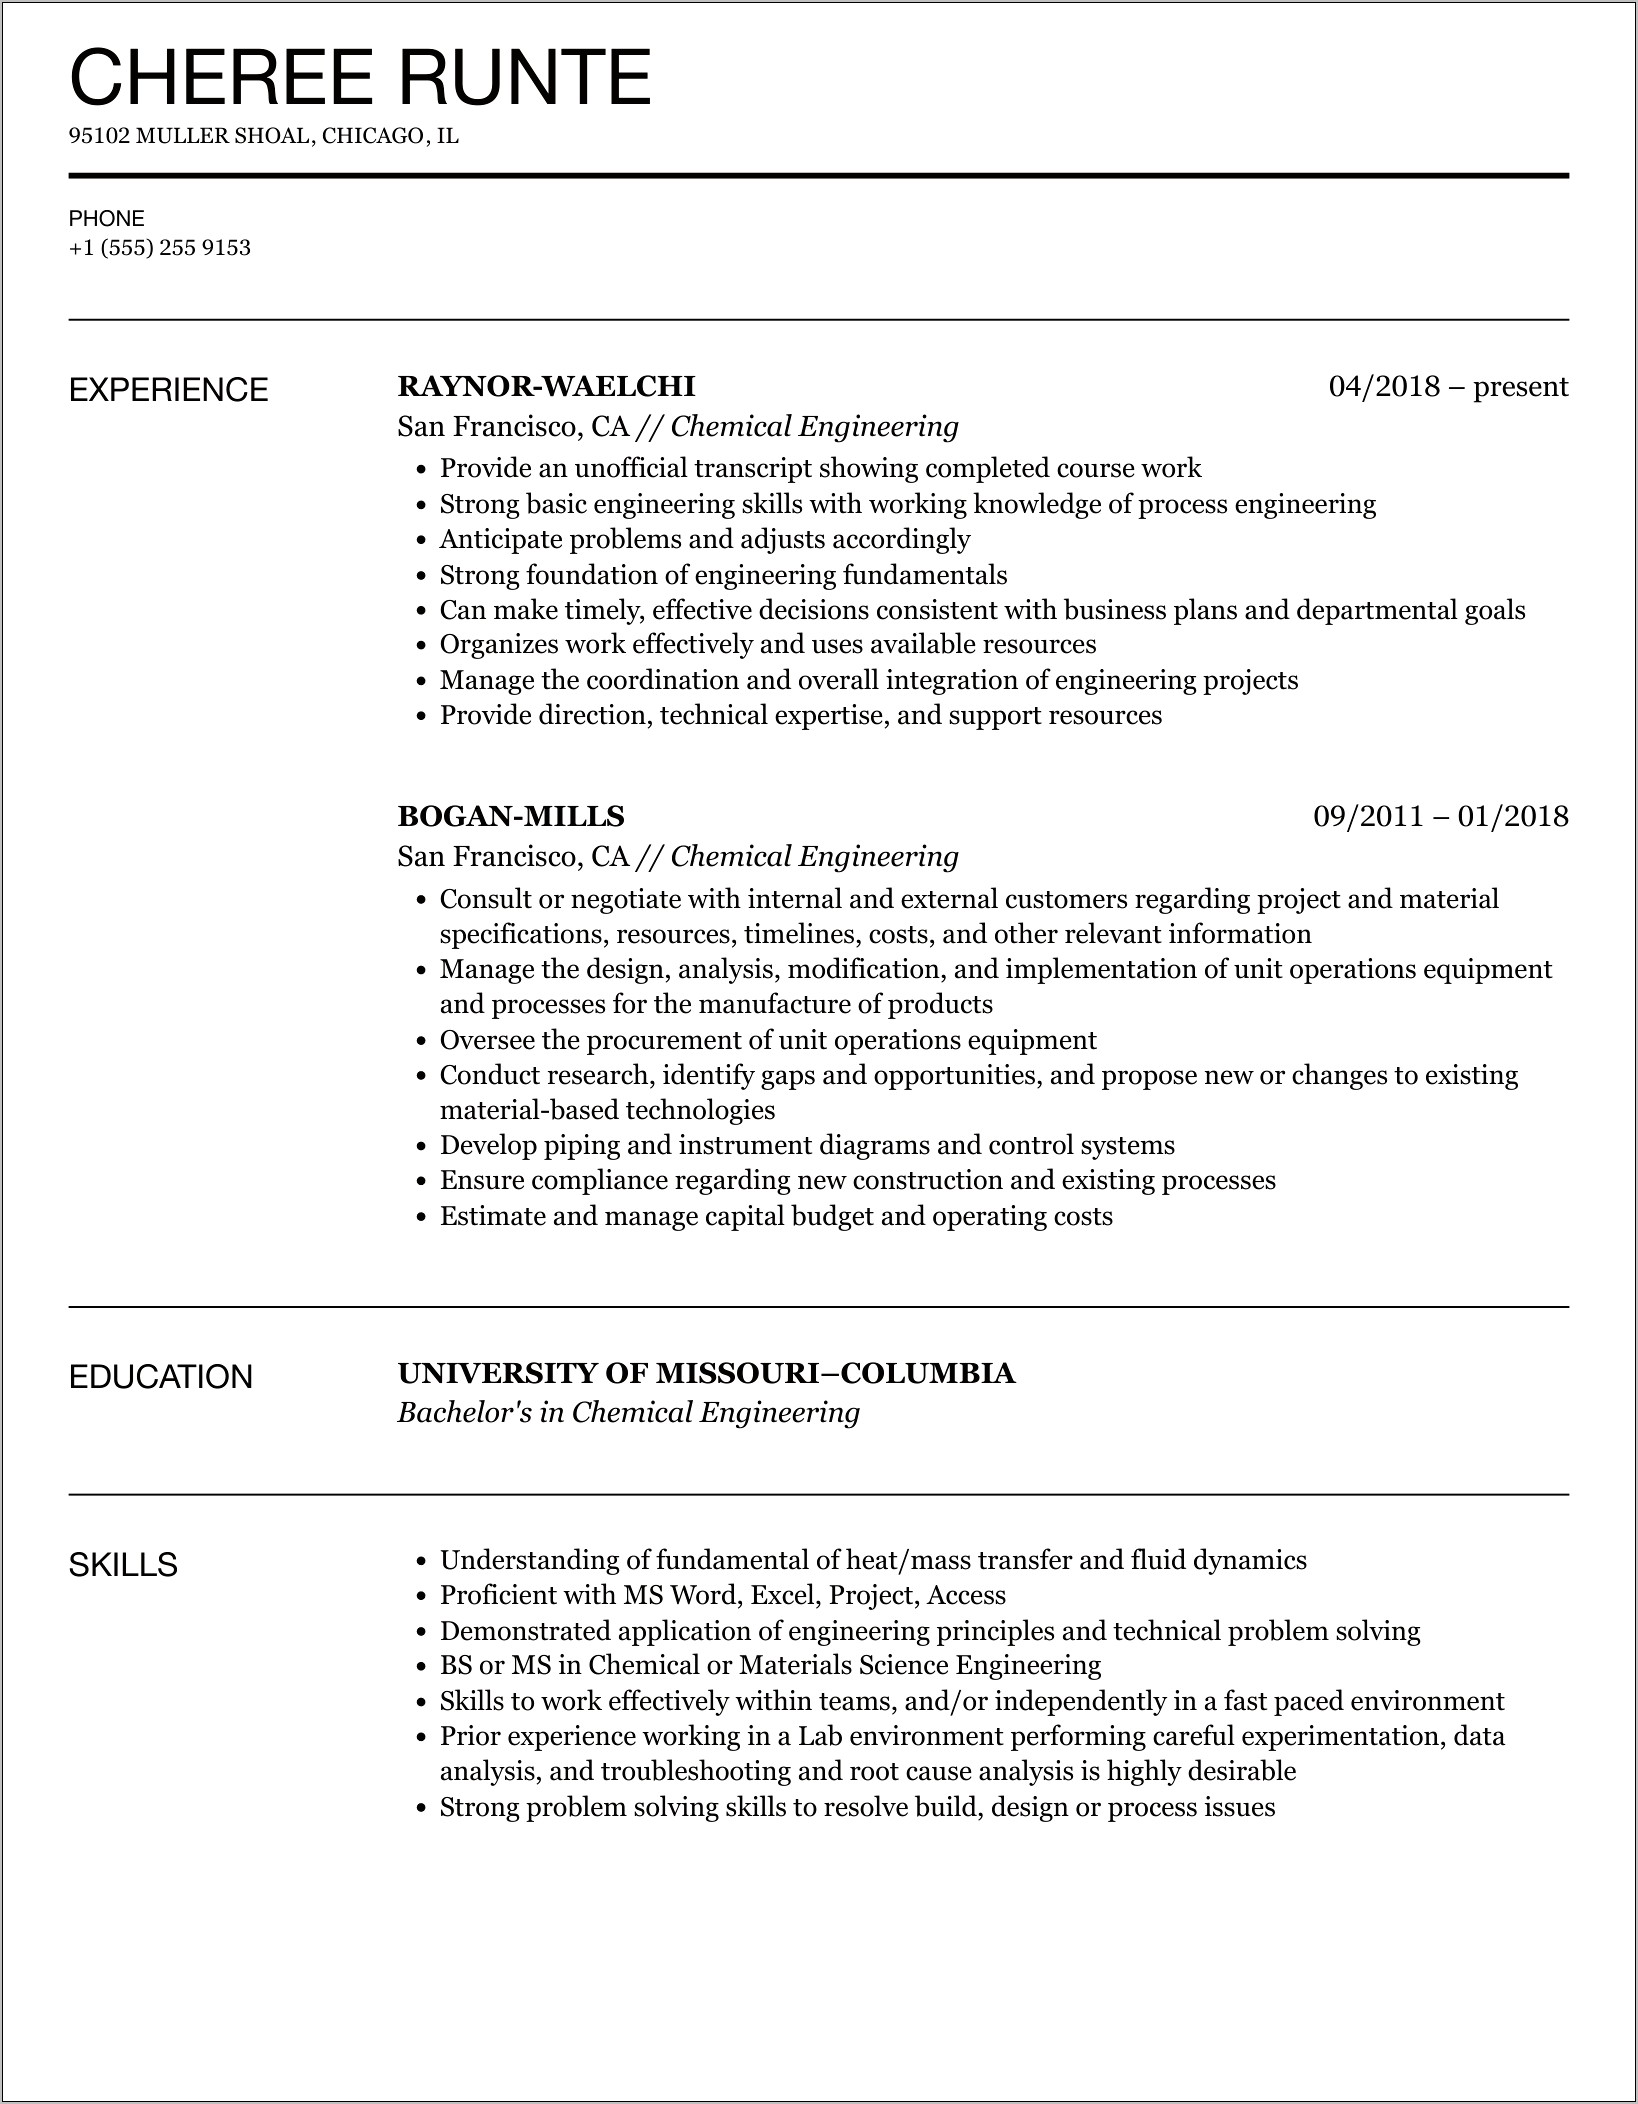 Chemical Engineer Resume Objective Statement